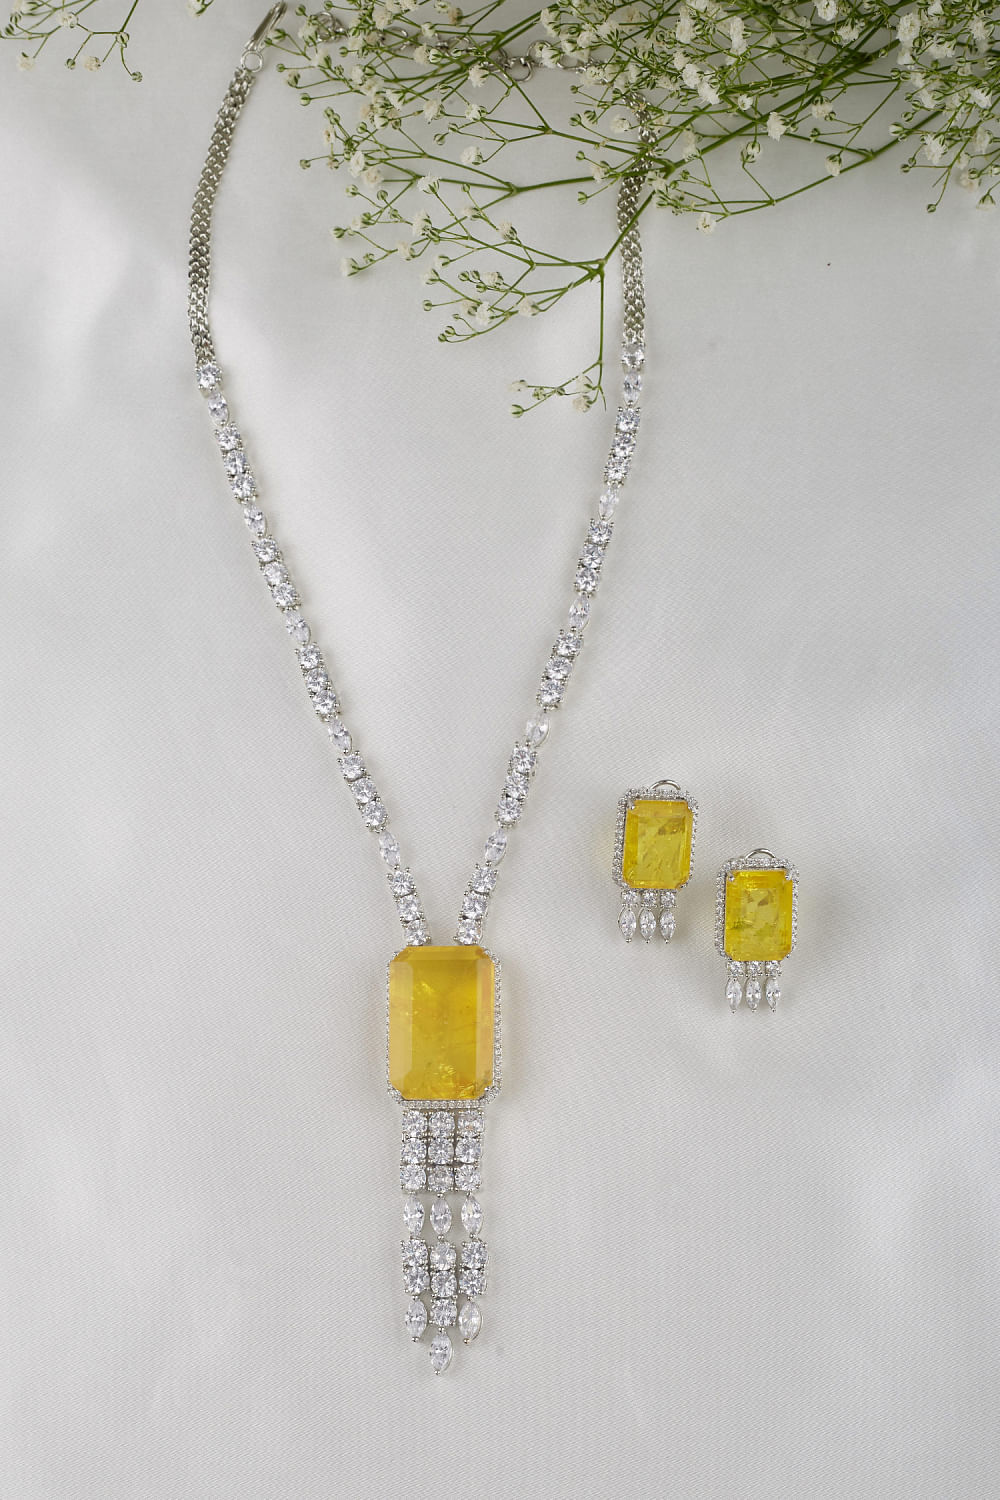 Gabriel Silver Trends Yellow Sapphire Necklace NK3746SVJYS | S. Silverberg  Finer Jewelers